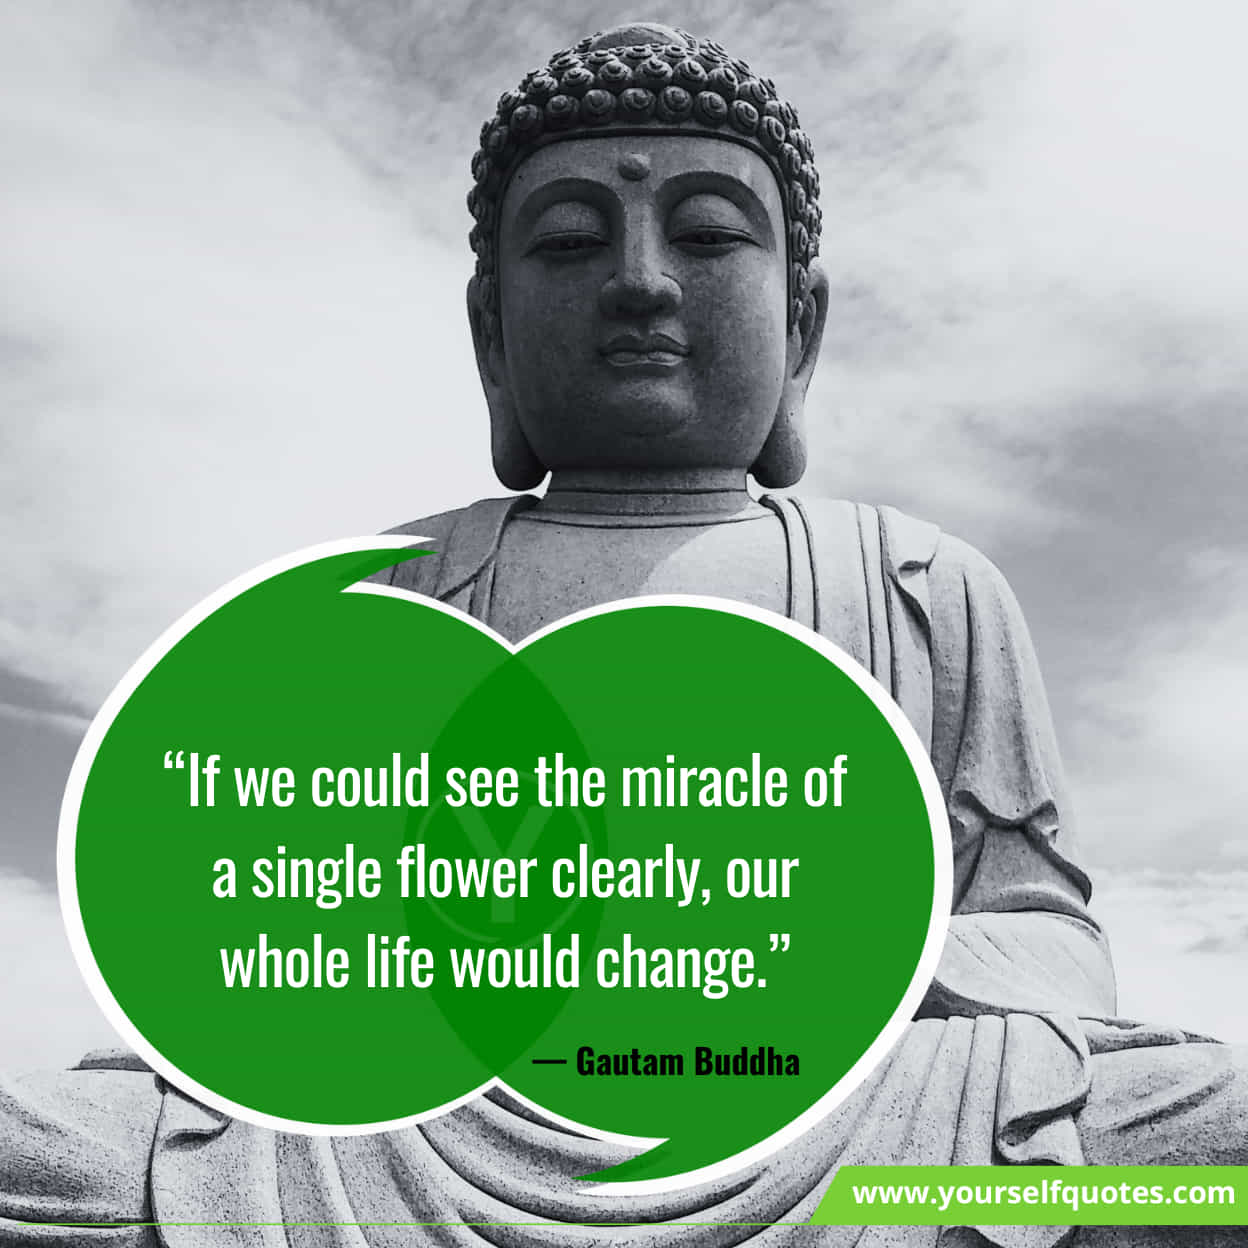 Buddha Quotes For Life